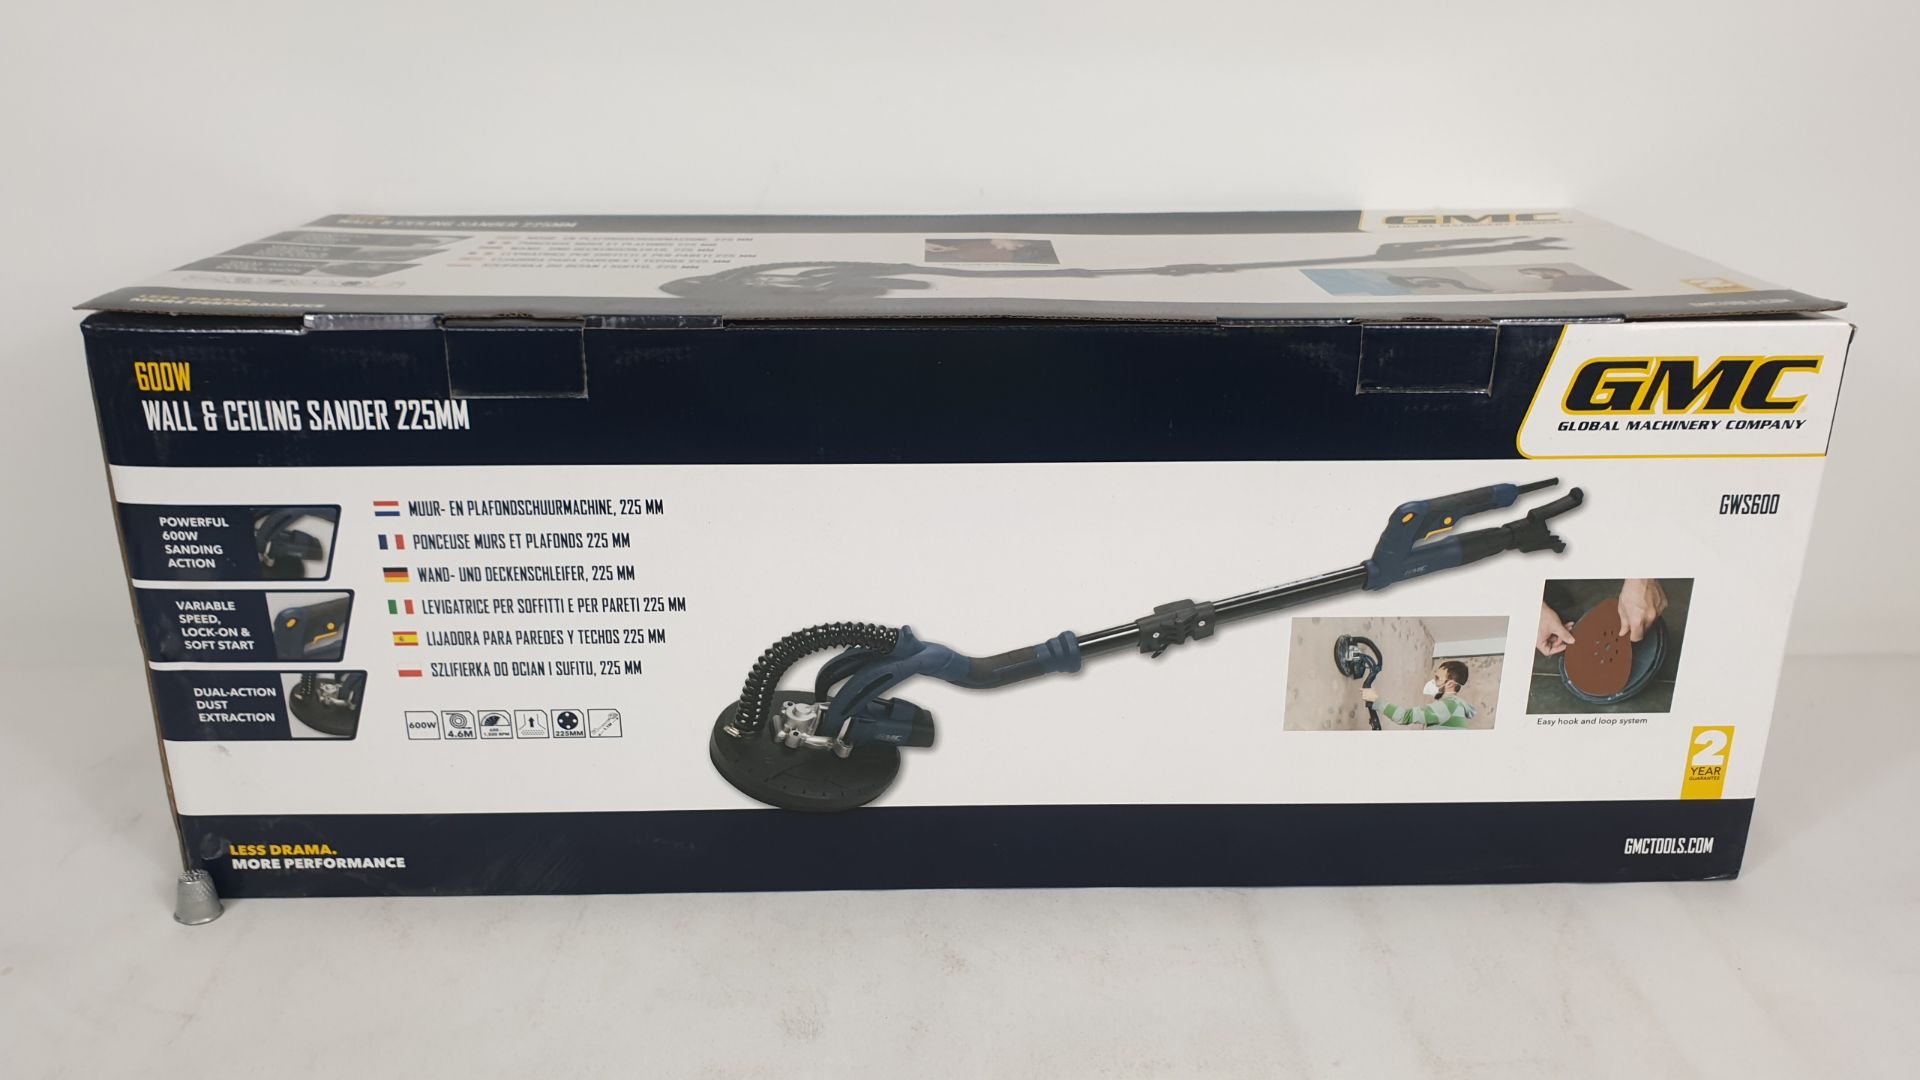 GMC 600W WALL AND CEILING SANDER 225M (PRODUCT CODE 264803) - (WITH 2 YEAR MANUFACTURERS GUARANTEE)